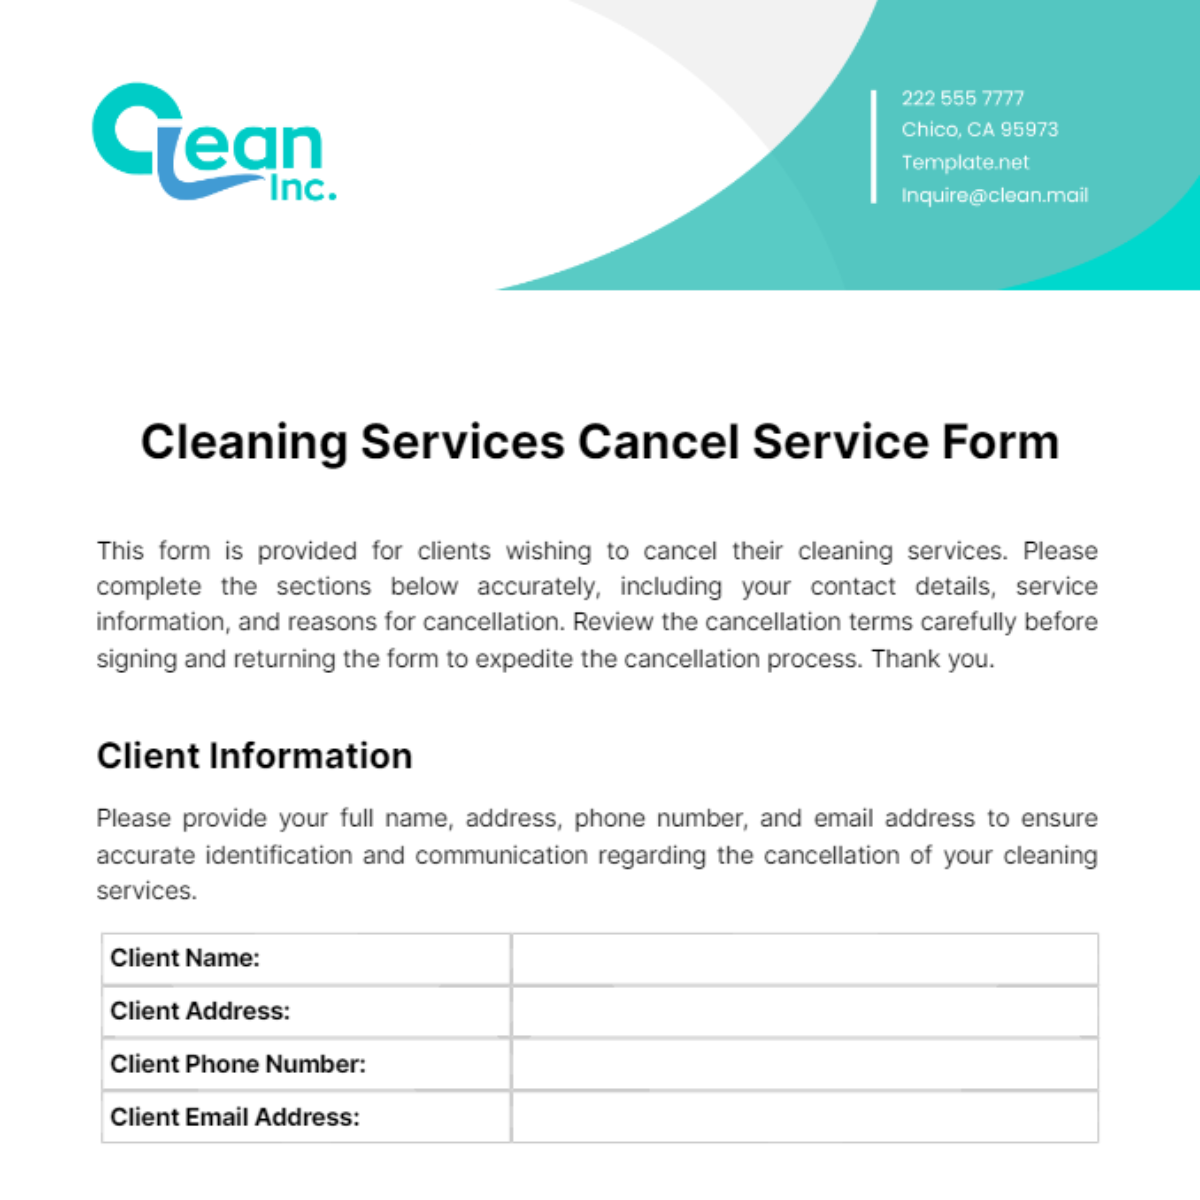 Free Cleaning Services Cancel Service Form Template